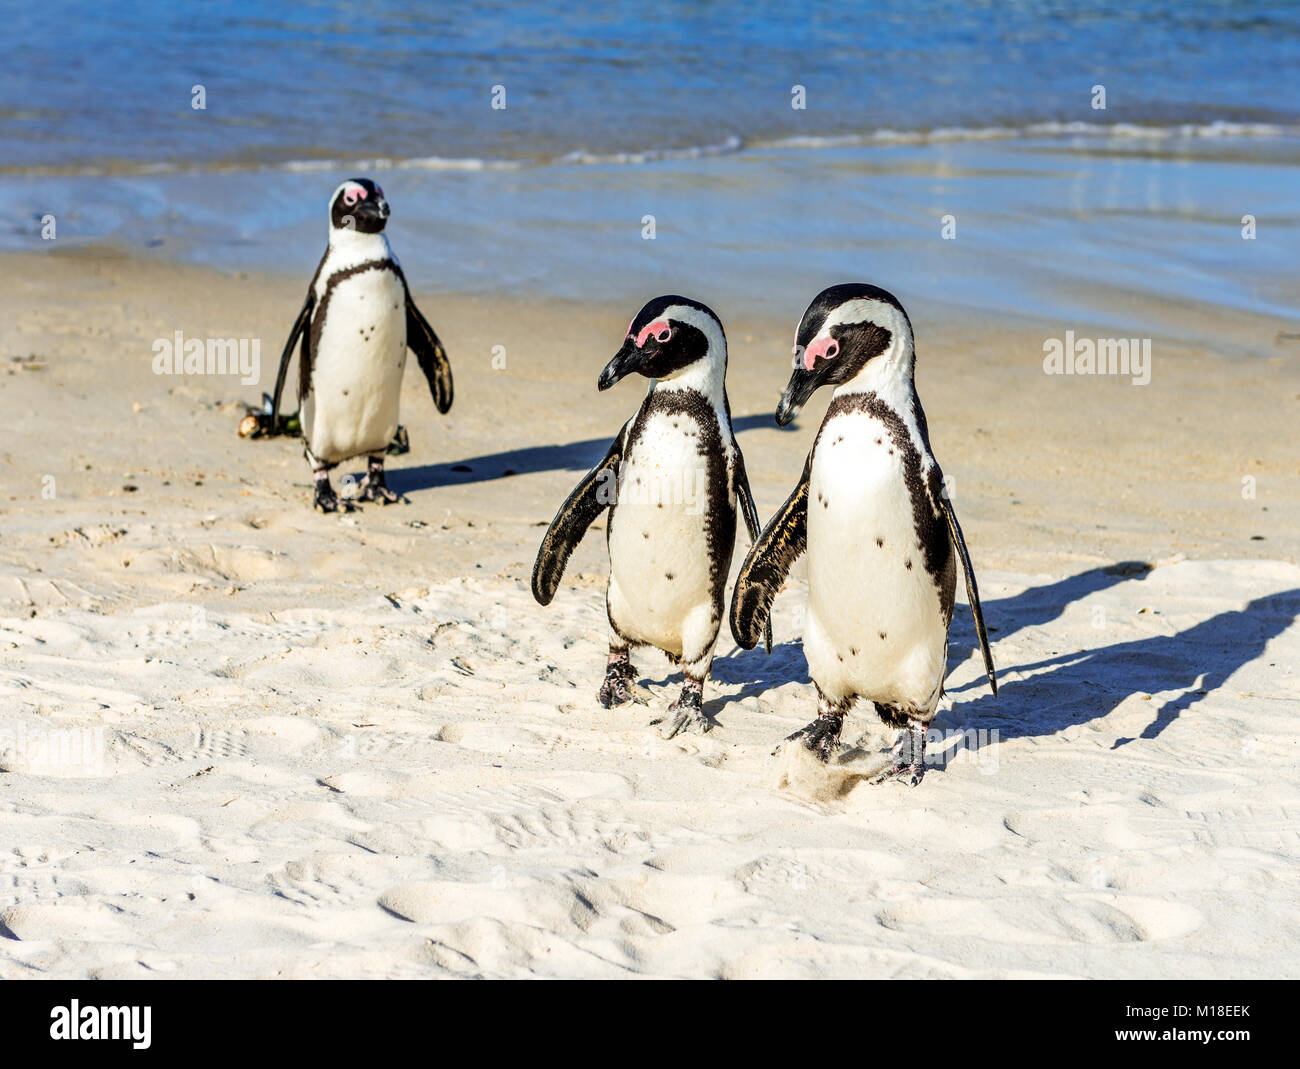 In Simon’s Town, South Africa, two penguins walk together on a beach while another looks at them from behind. Stock Photo